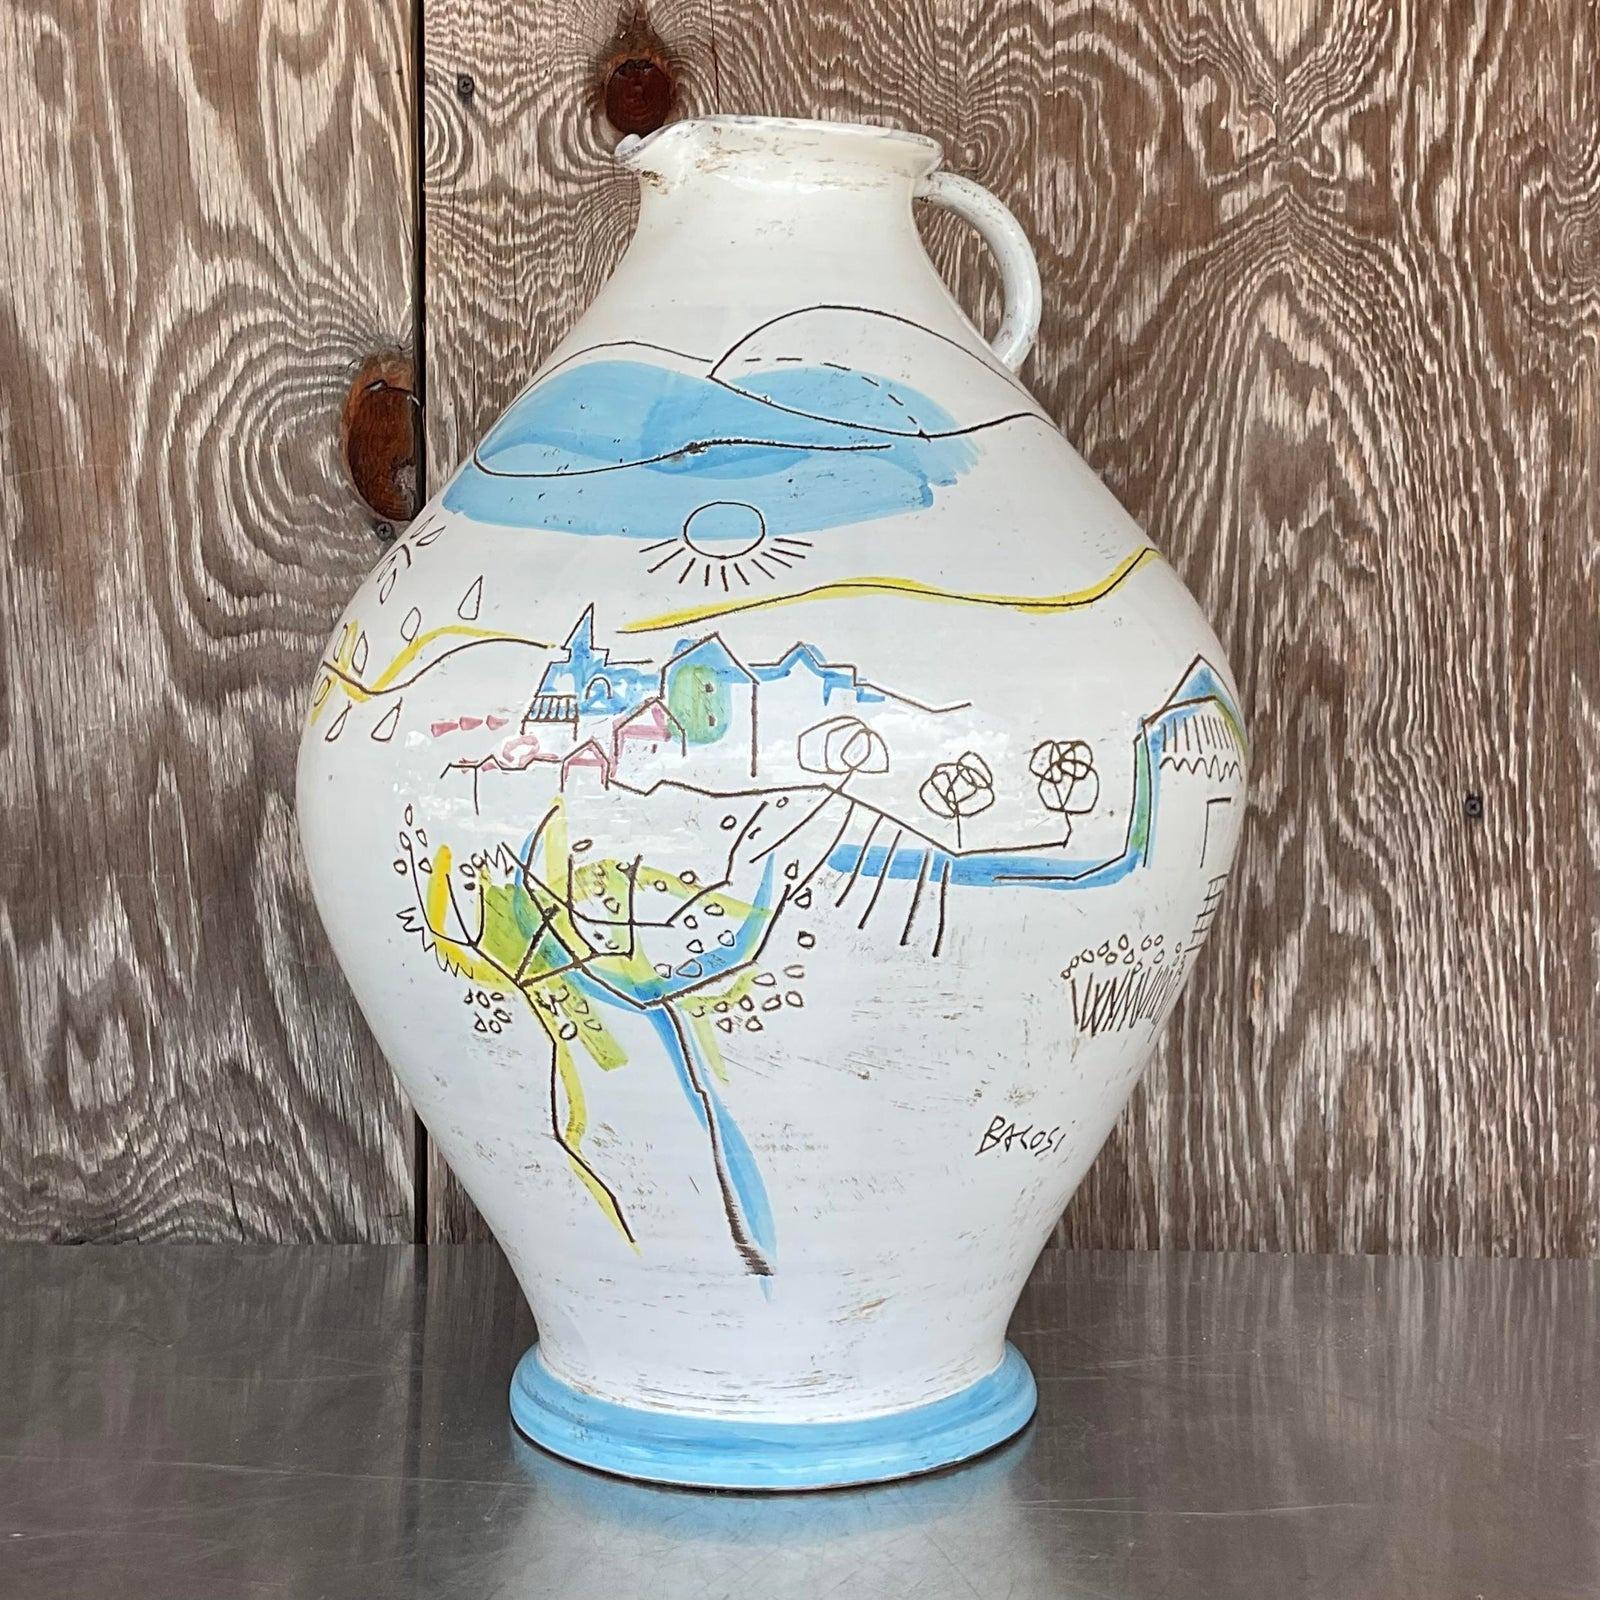 A fabulous vintage Italian Art pottery jug. Done by the highly collectible Manlio Bacosi. Signed on the vase. A beautiful pastoral scene in bright clear colors. Acquired from a Palm Beach estate